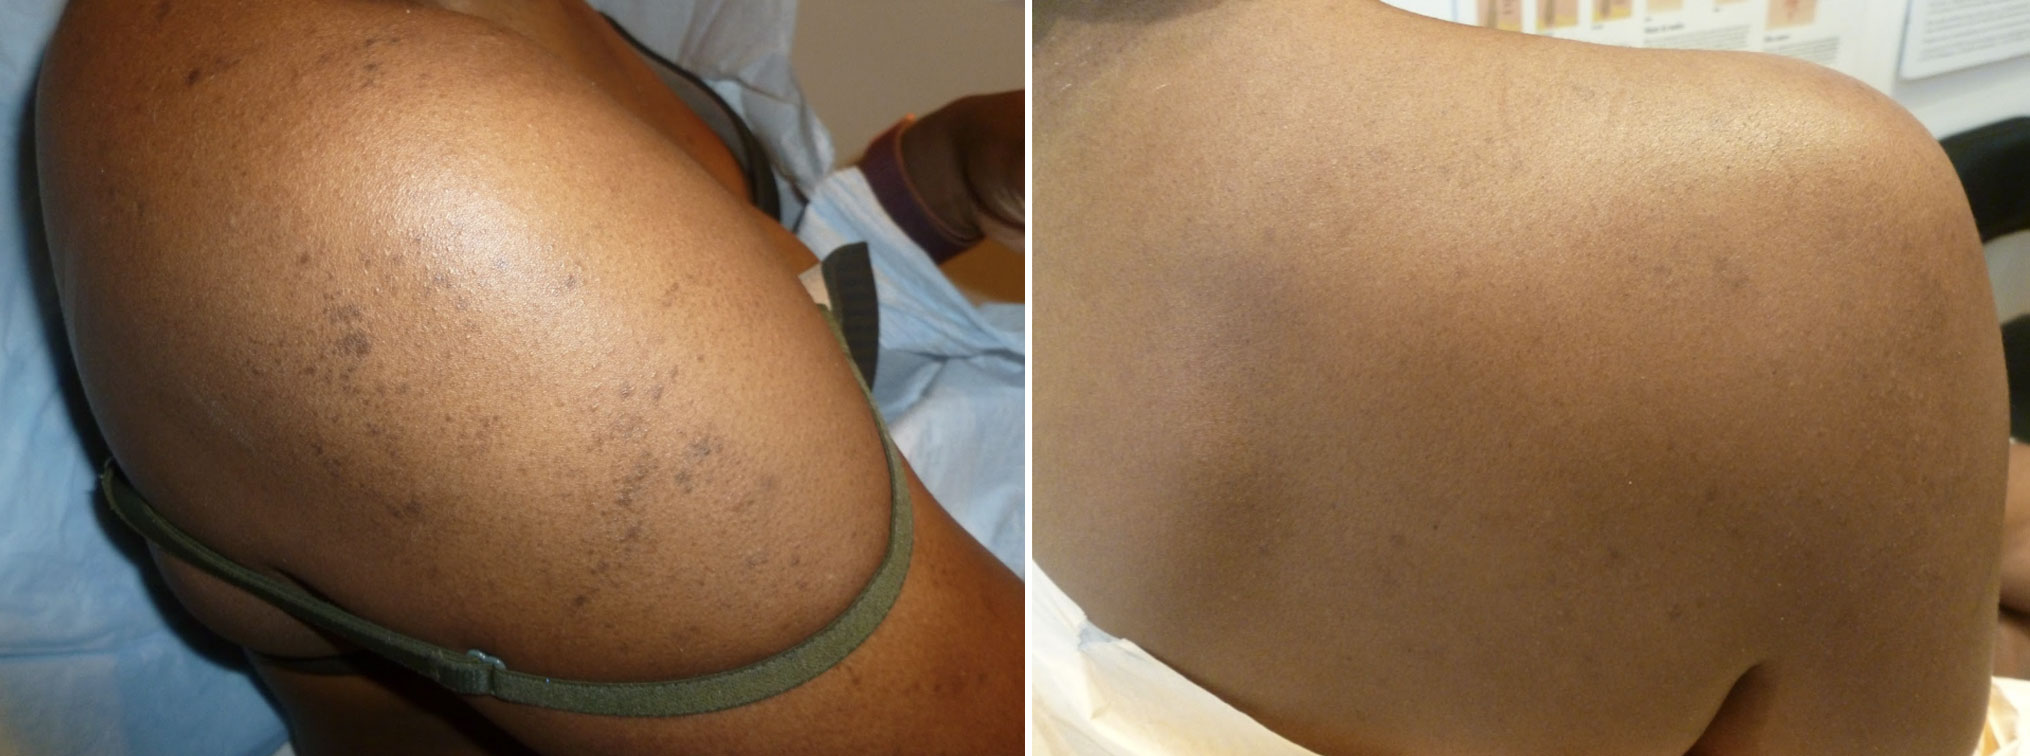 Body hyperpigmentation before and after Fraxel laser